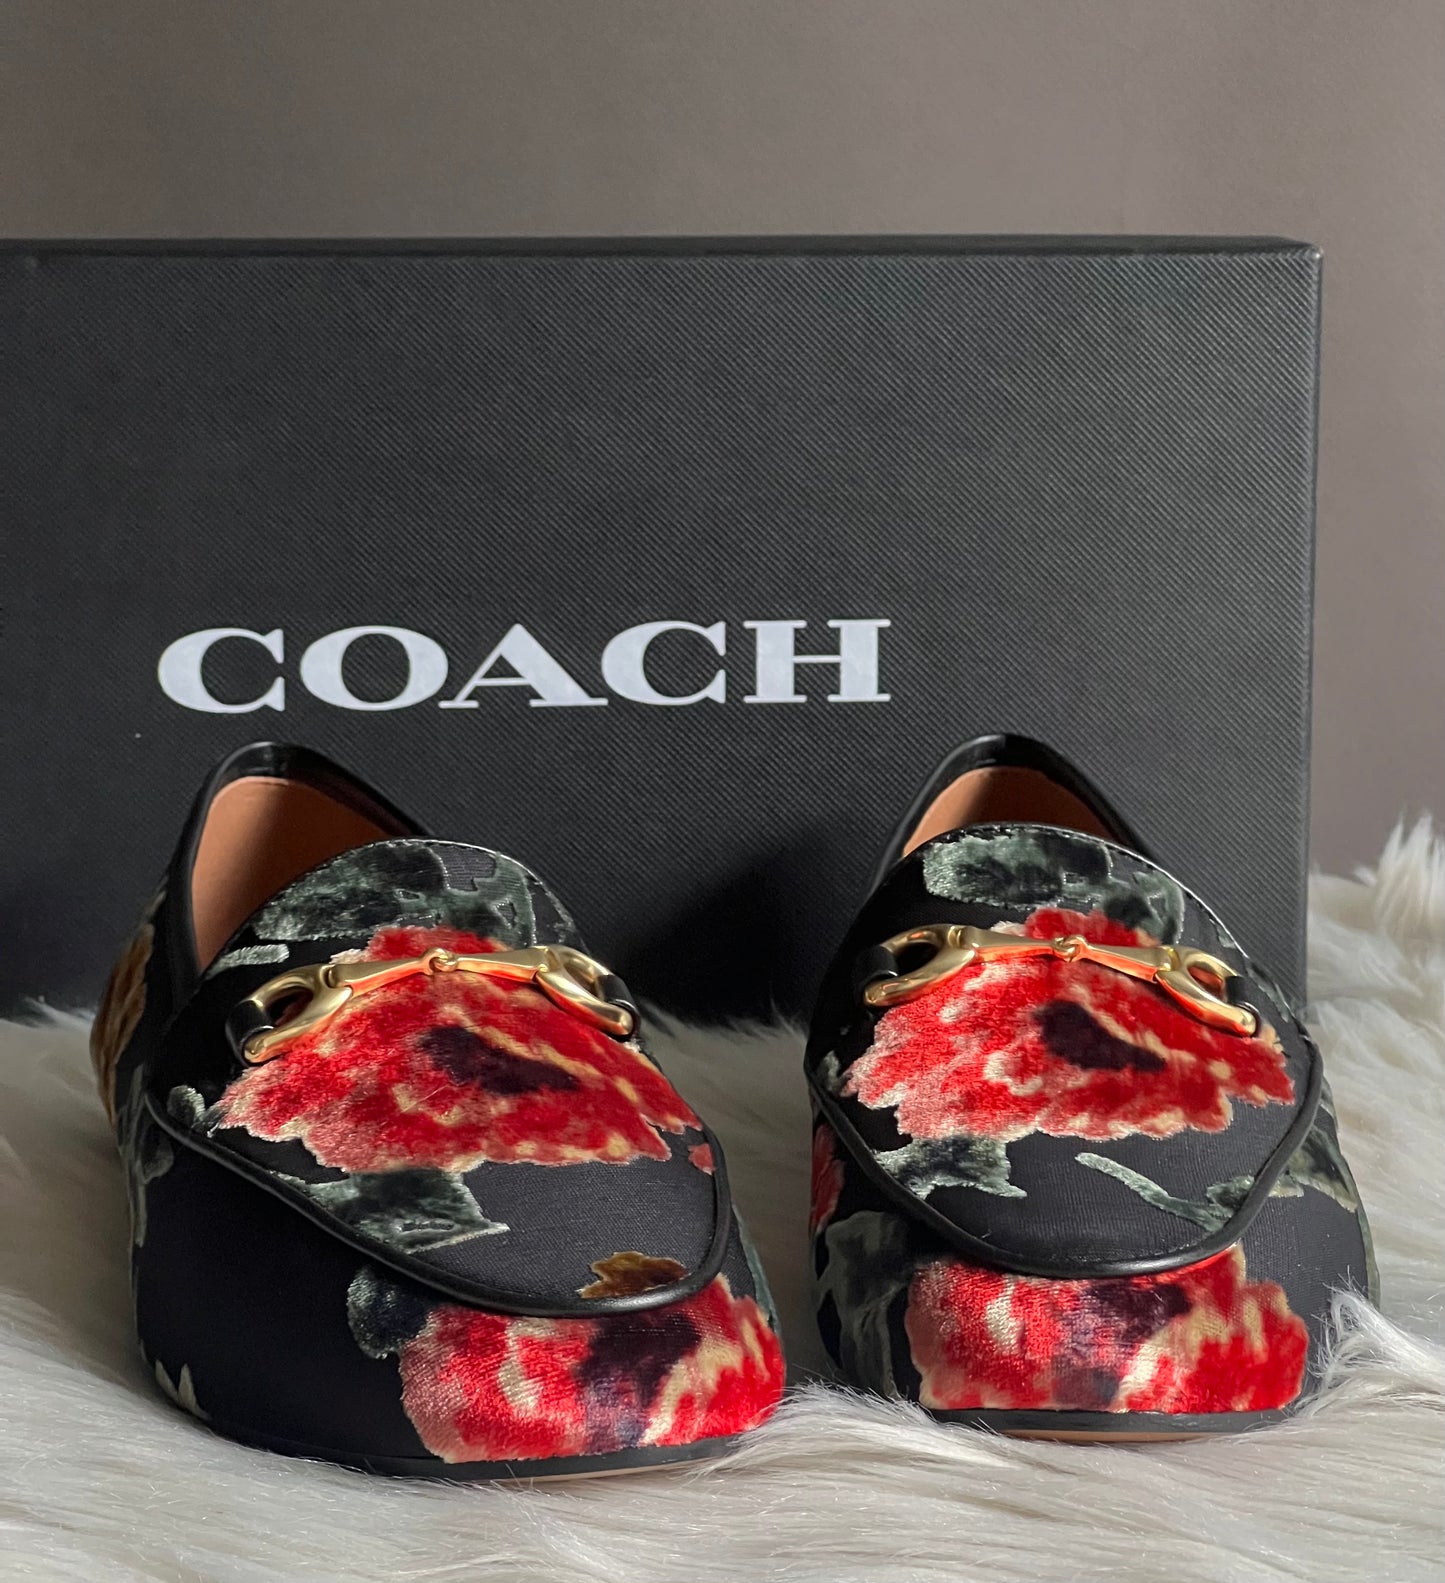 Coach Haley Loafer with Floral Print